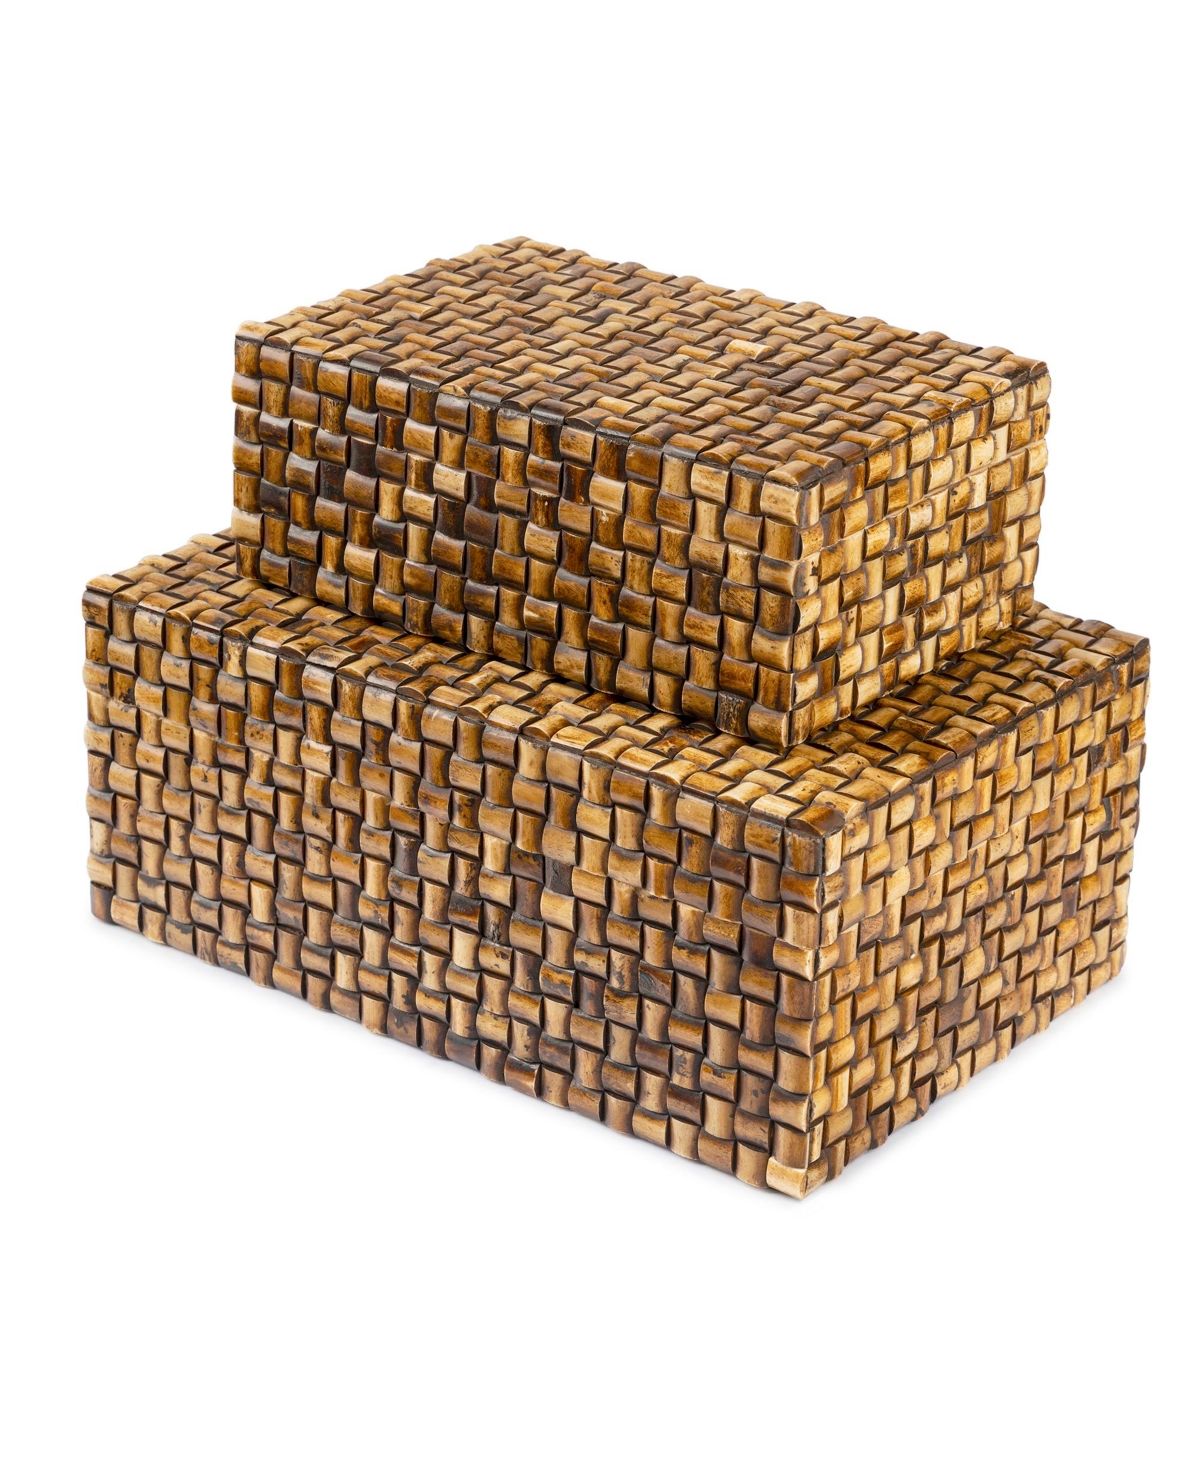 Nomad Decorative Boxes, Set of 2 - Brown